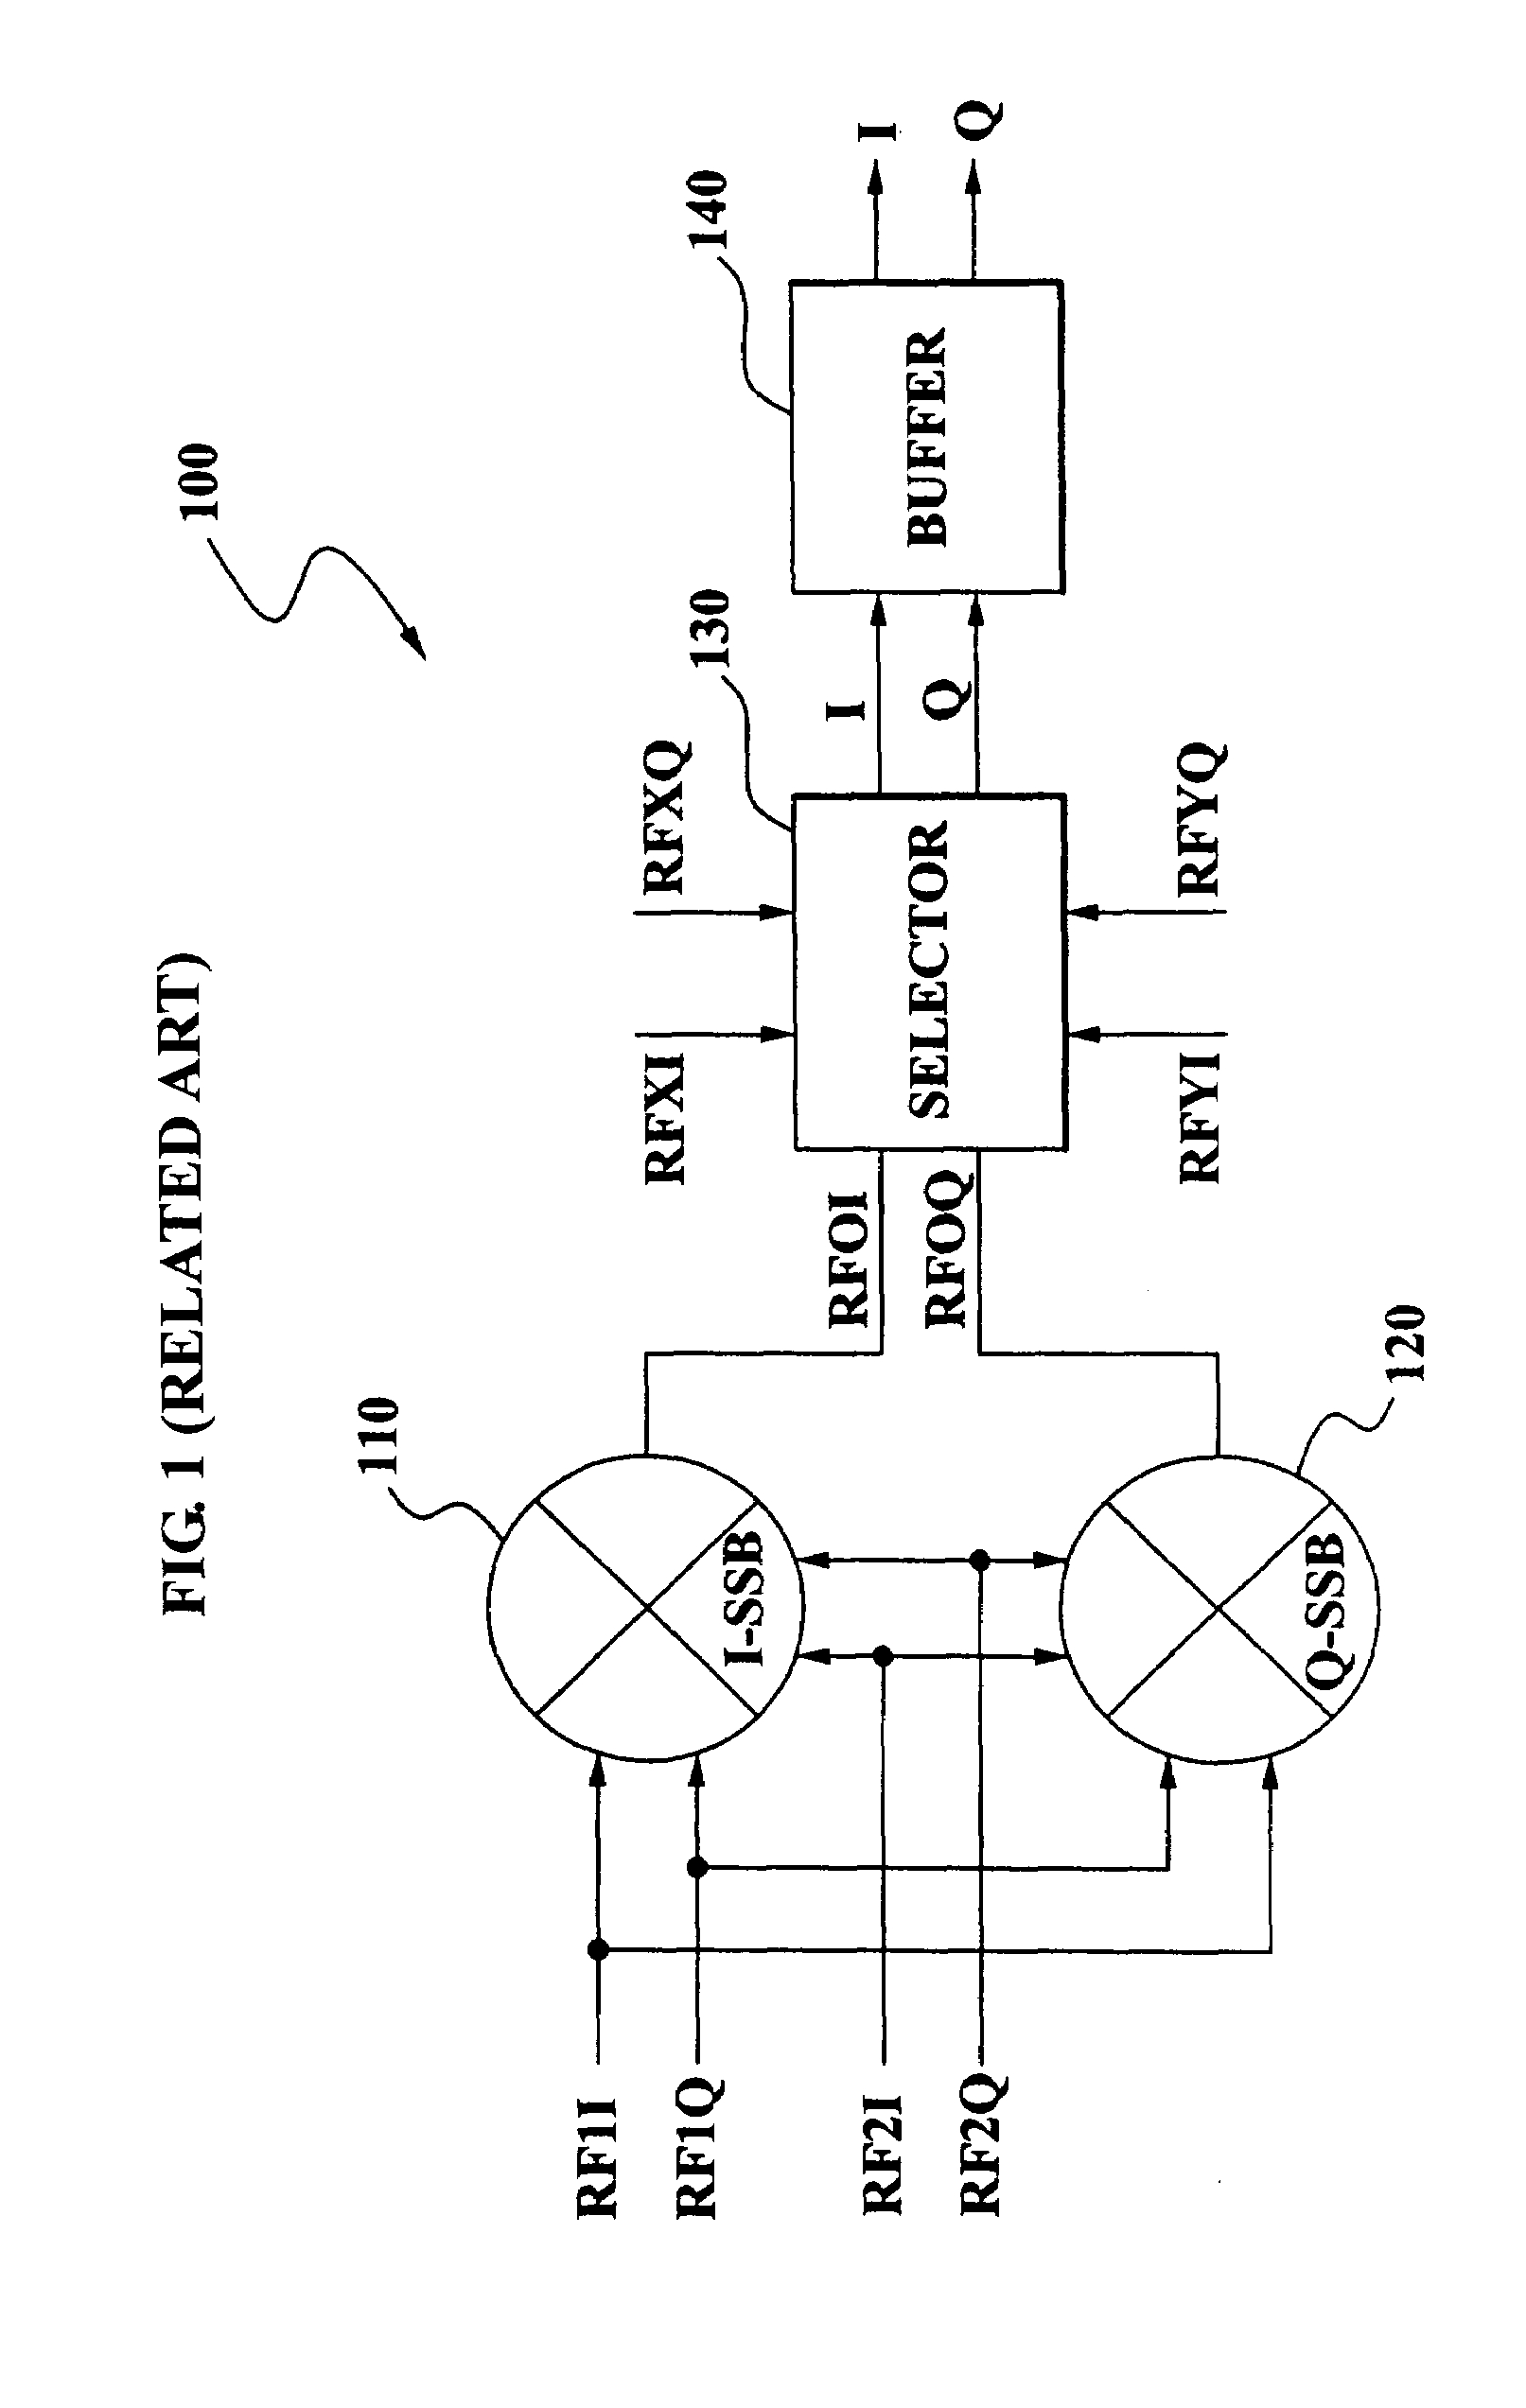 Frequency synthesizing apparatus and method having injection-locked quadrature VCO in RF transceiver